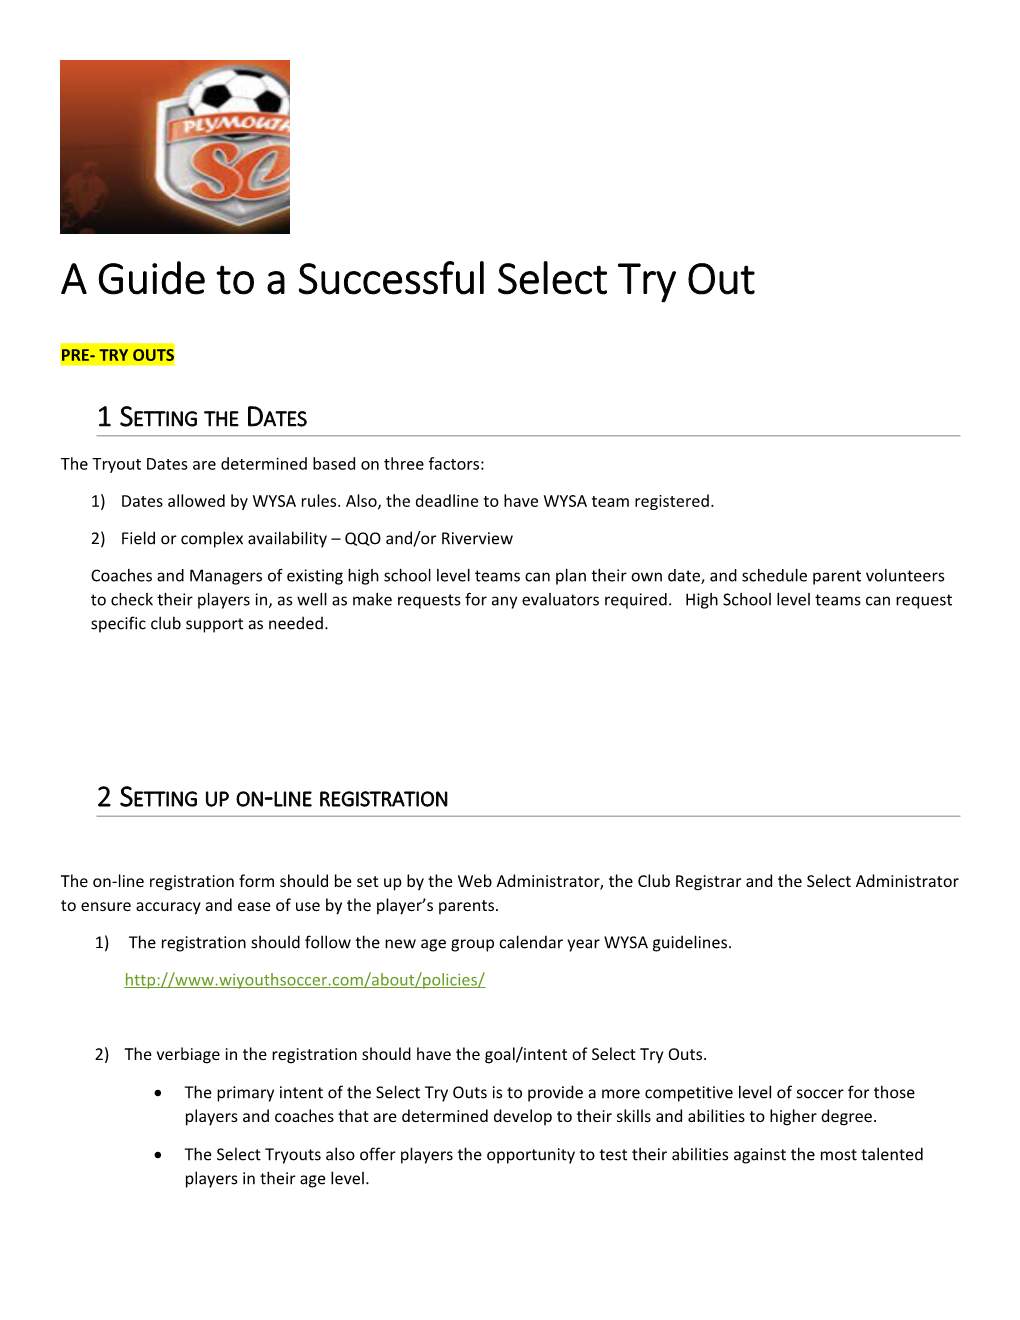 A Guide to a Successful Select Try Out